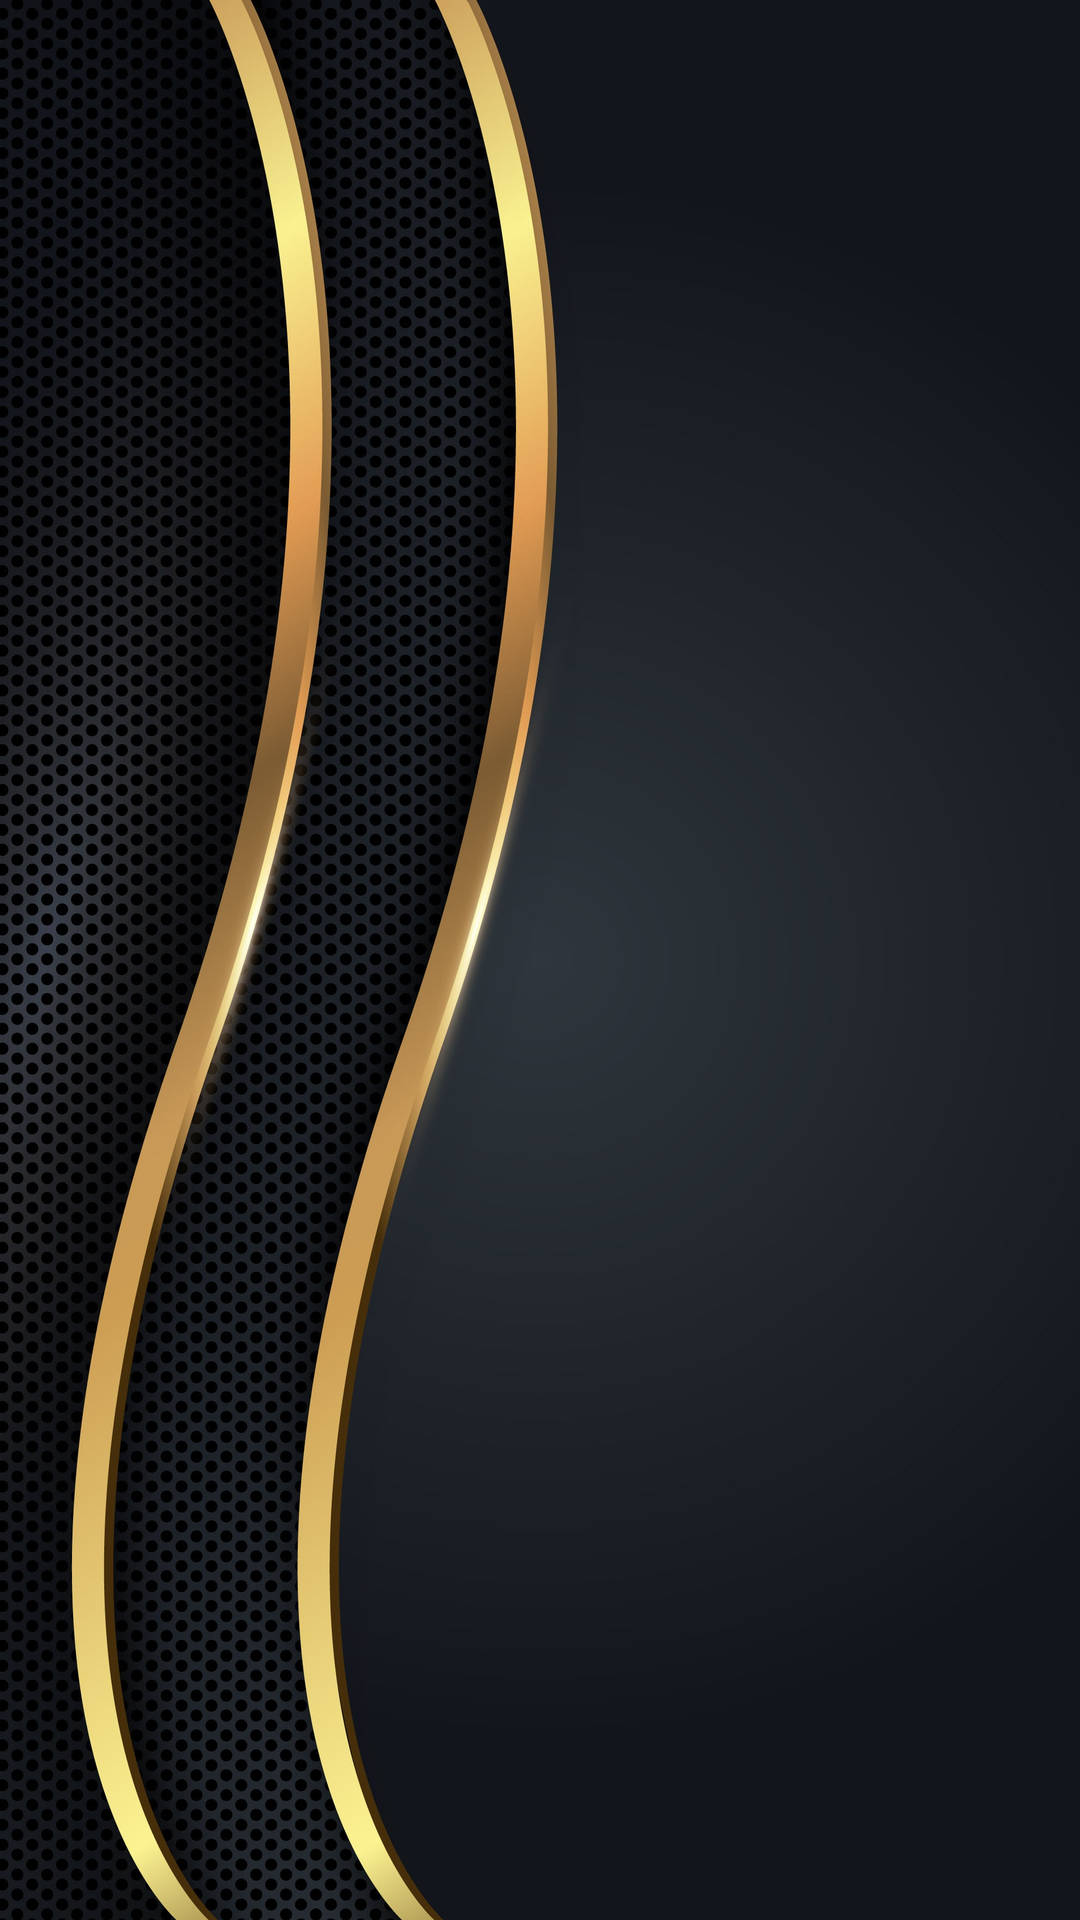 Curvy Lines Black And Gold iPhone Wallpaper